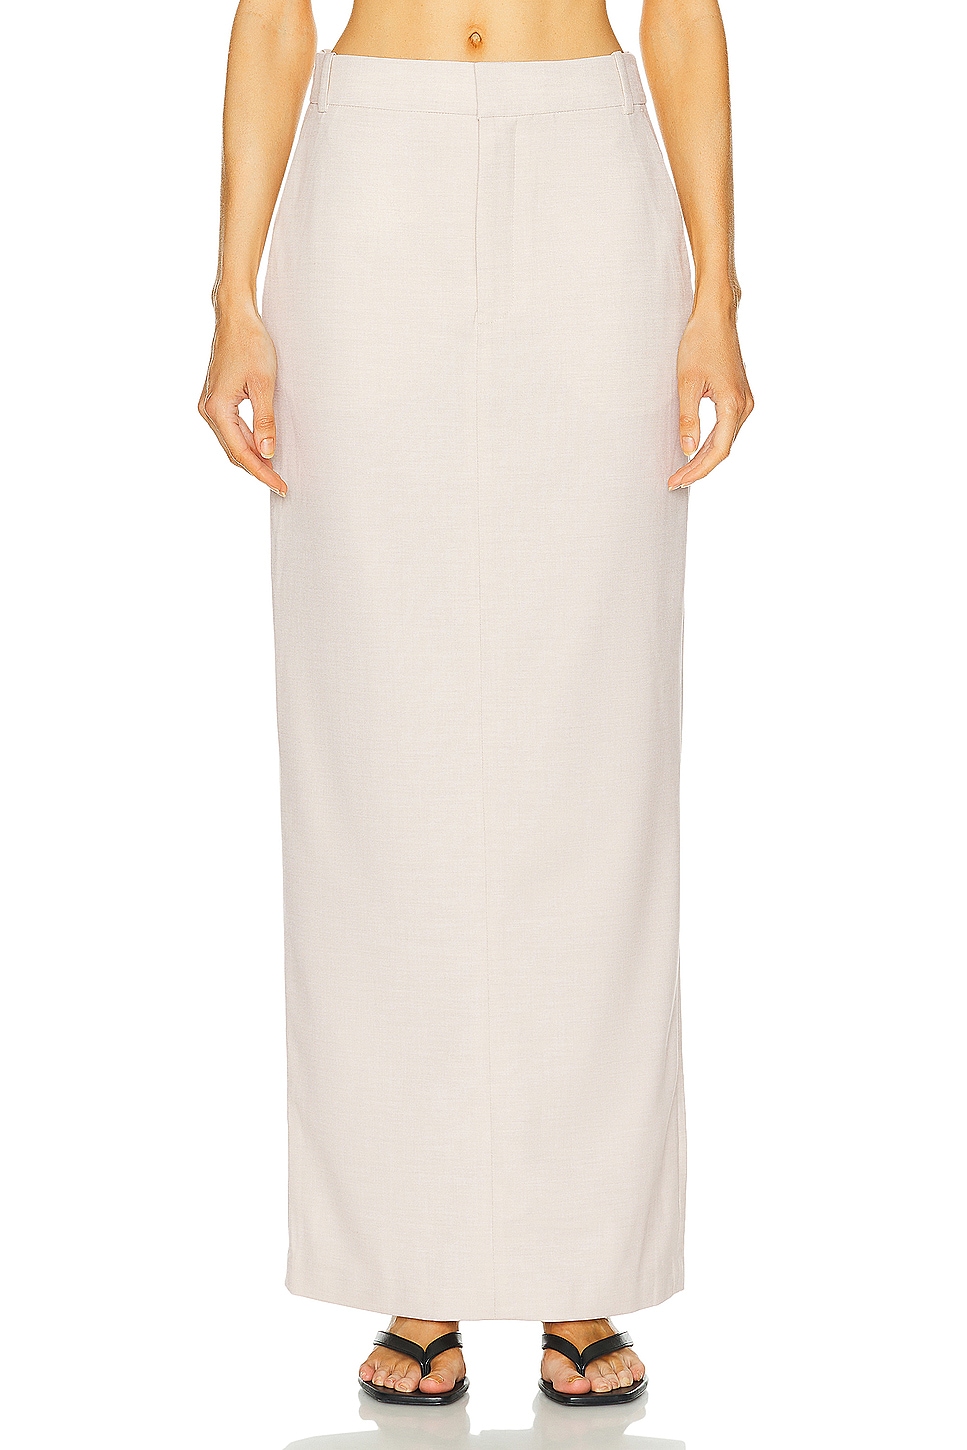 by Marianna Hendry Maxi Skirt in Beige